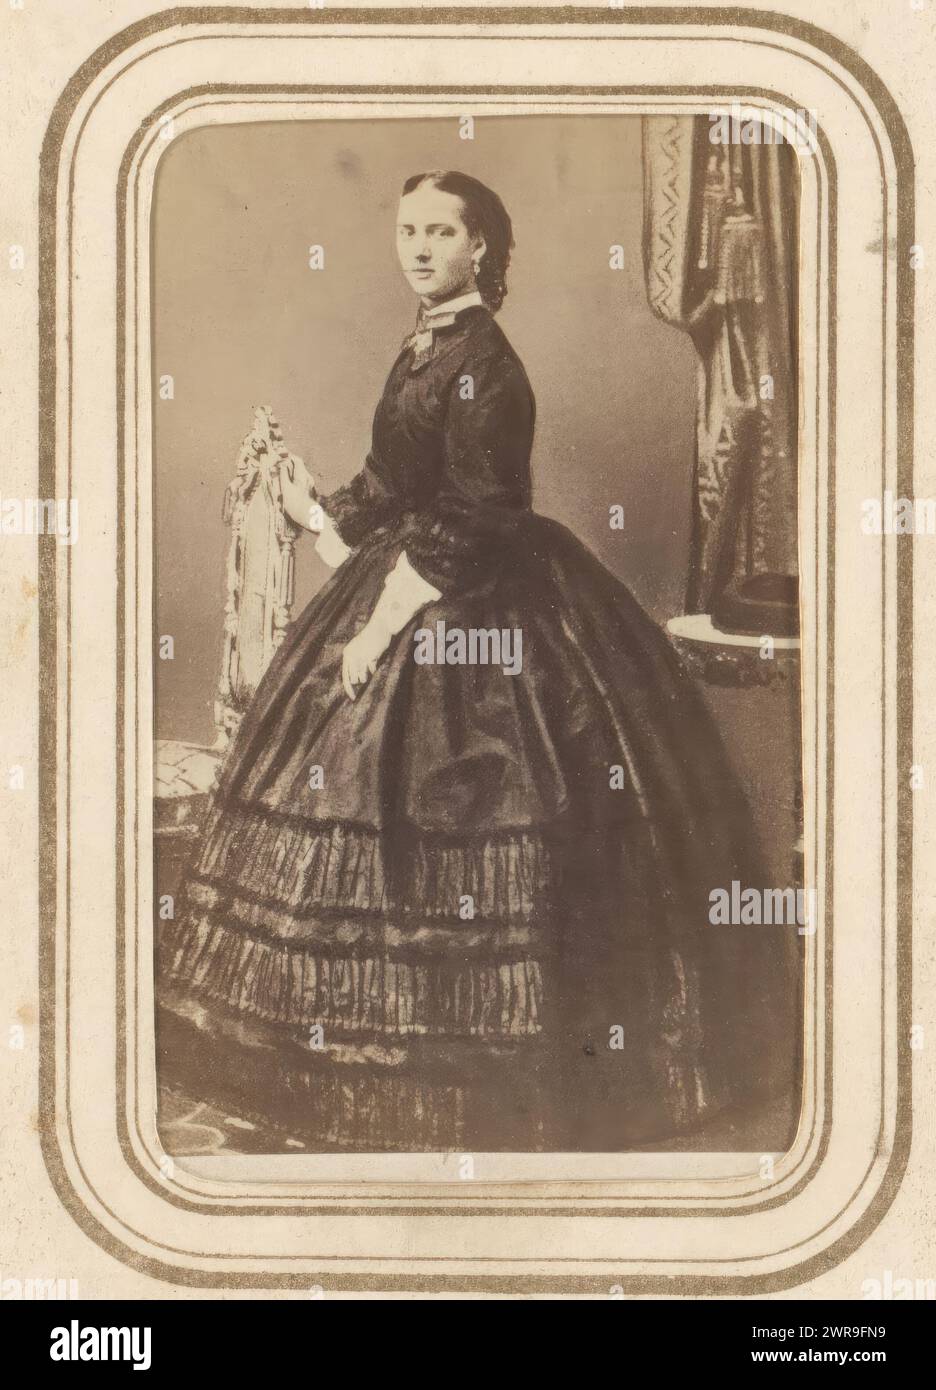 Portrait of Alexandra of Denmark, Princess of Wales, This photo is part of an album., anonymous, 1860 - 1870, cardboard, albumen print, height 83 mm × width 52 mm, photograph Stock Photo